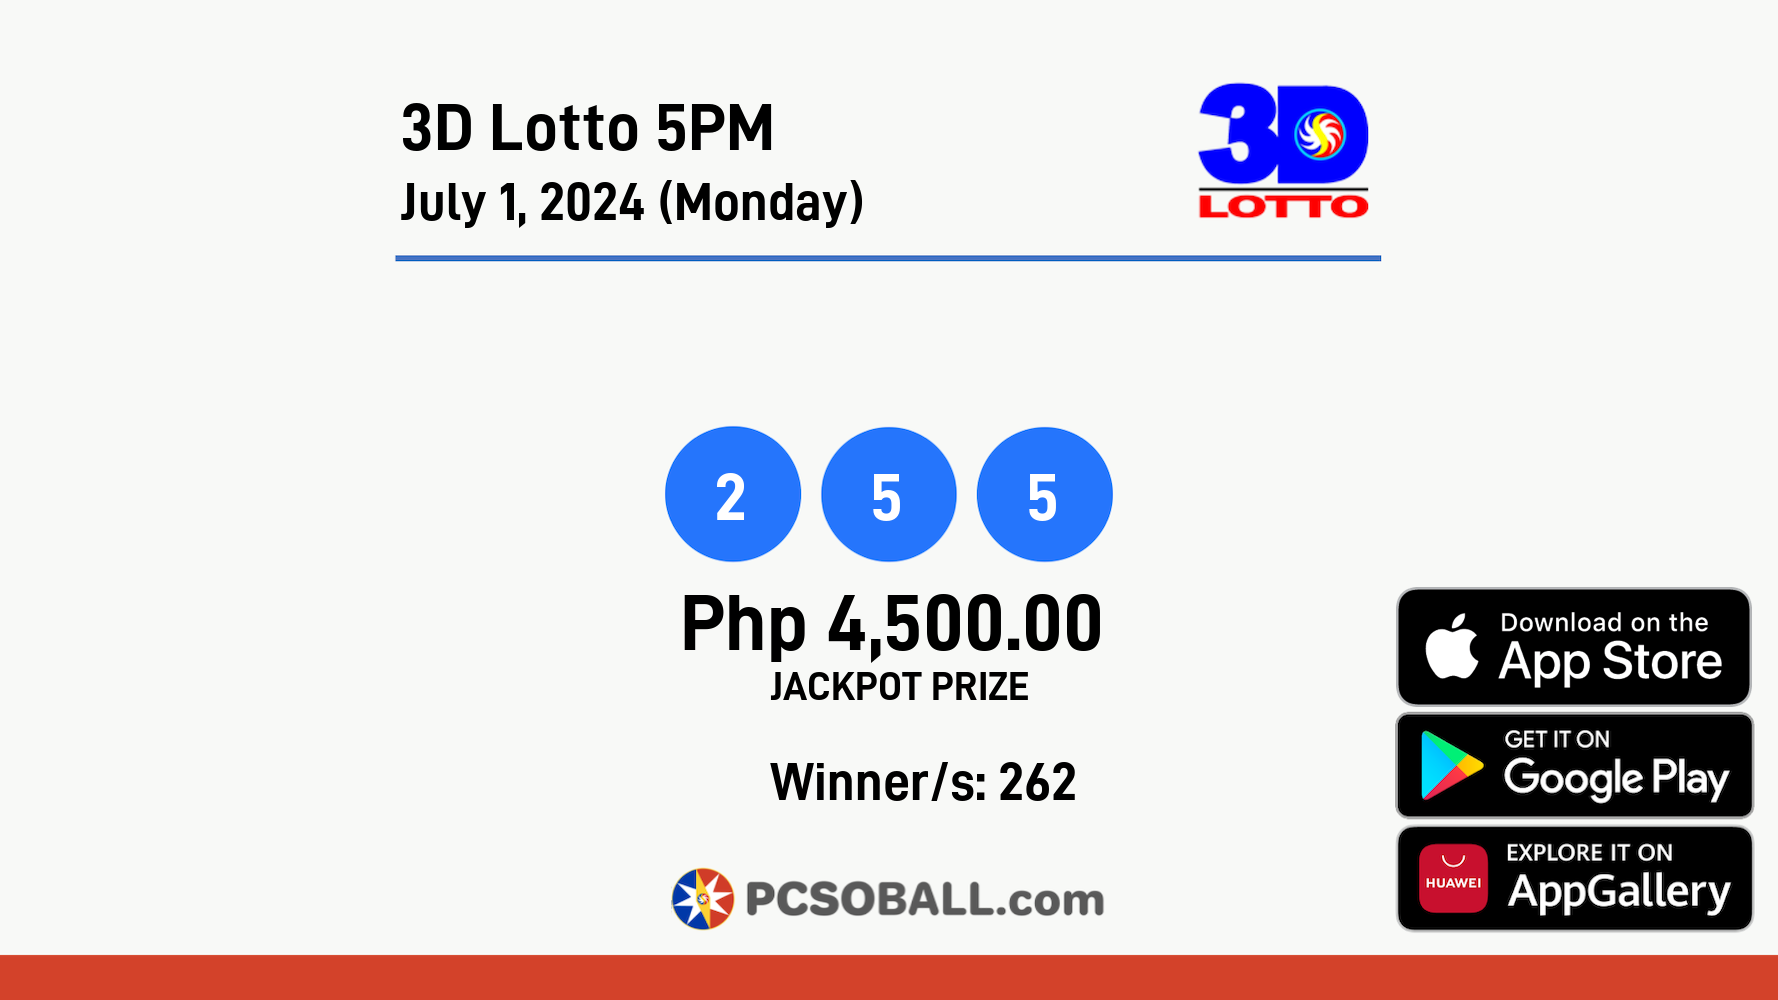 3D Lotto 5PM July 1, 2024 (Monday) Result